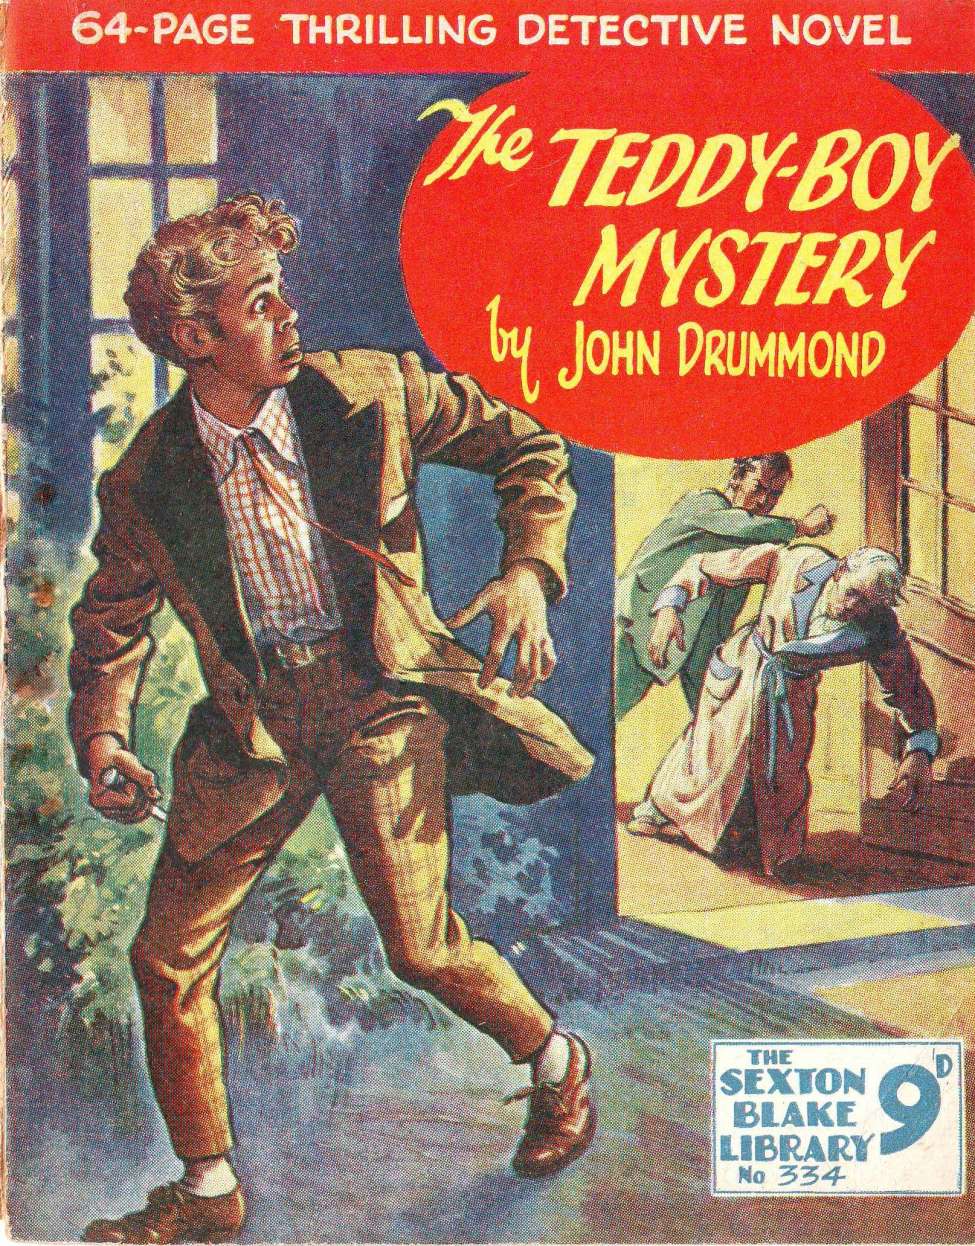 Comic Book Cover For Sexton Blake Library S3 334 - The Teddy-Boy Mystery